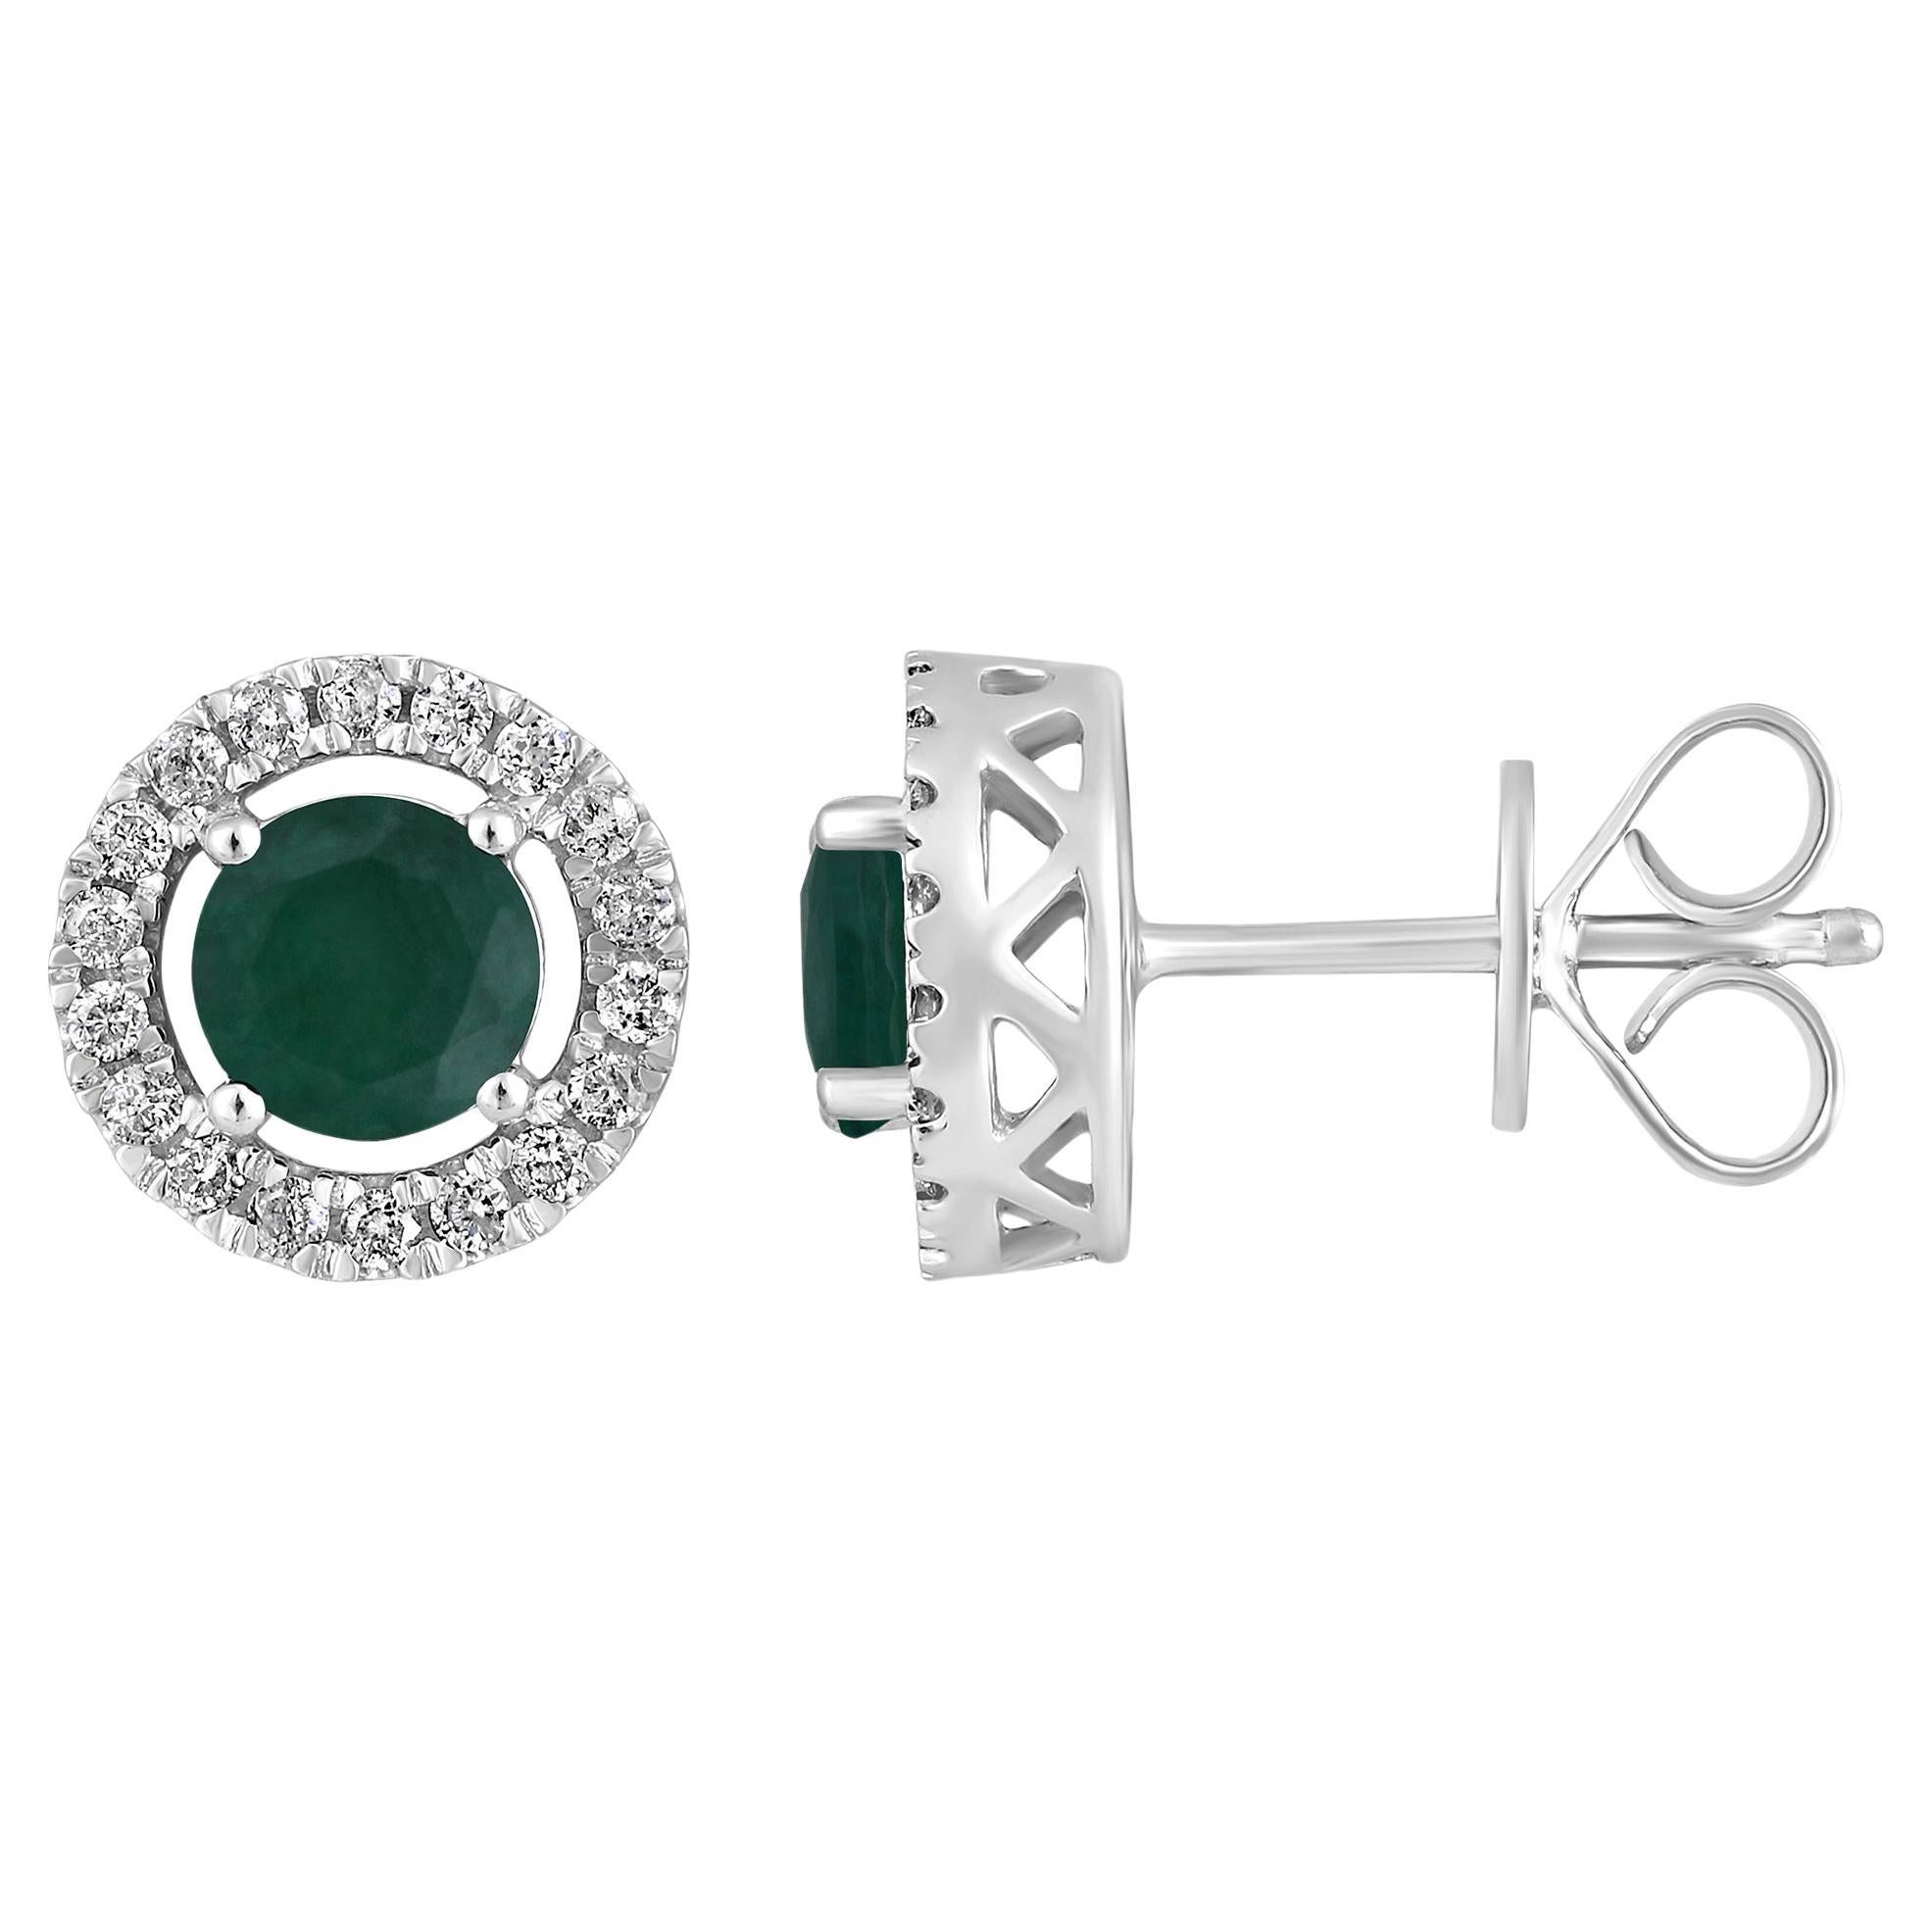 Certified 14K Gold 1.4ct Natural Diamond F-I1 w/ Emerald Round Stud Earrings